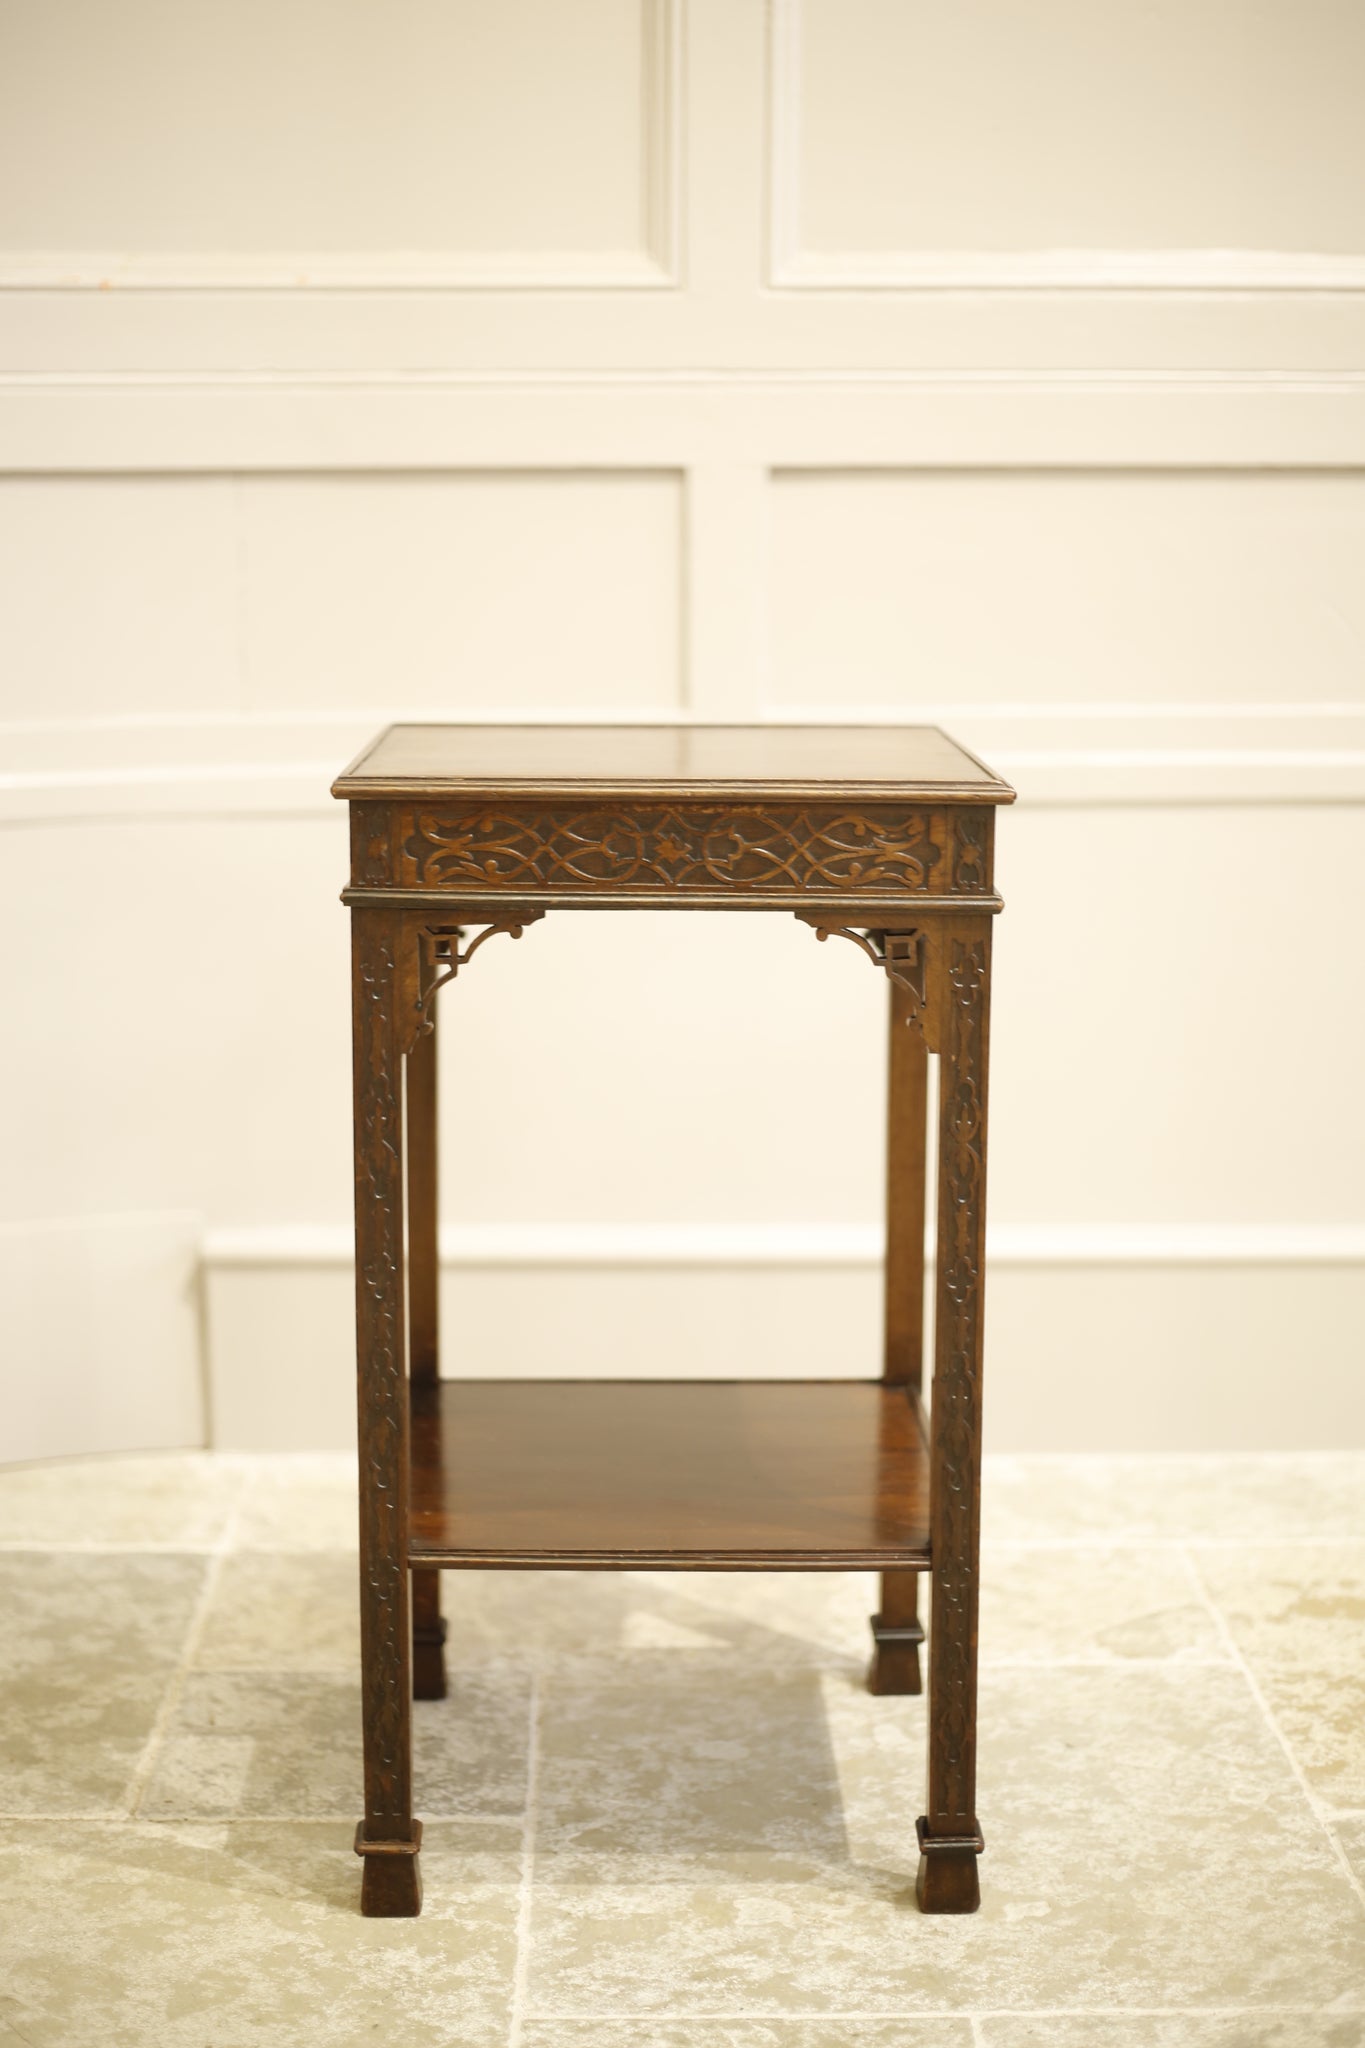 19th century Mahogany Chippendale side table - TallBoy Interiors